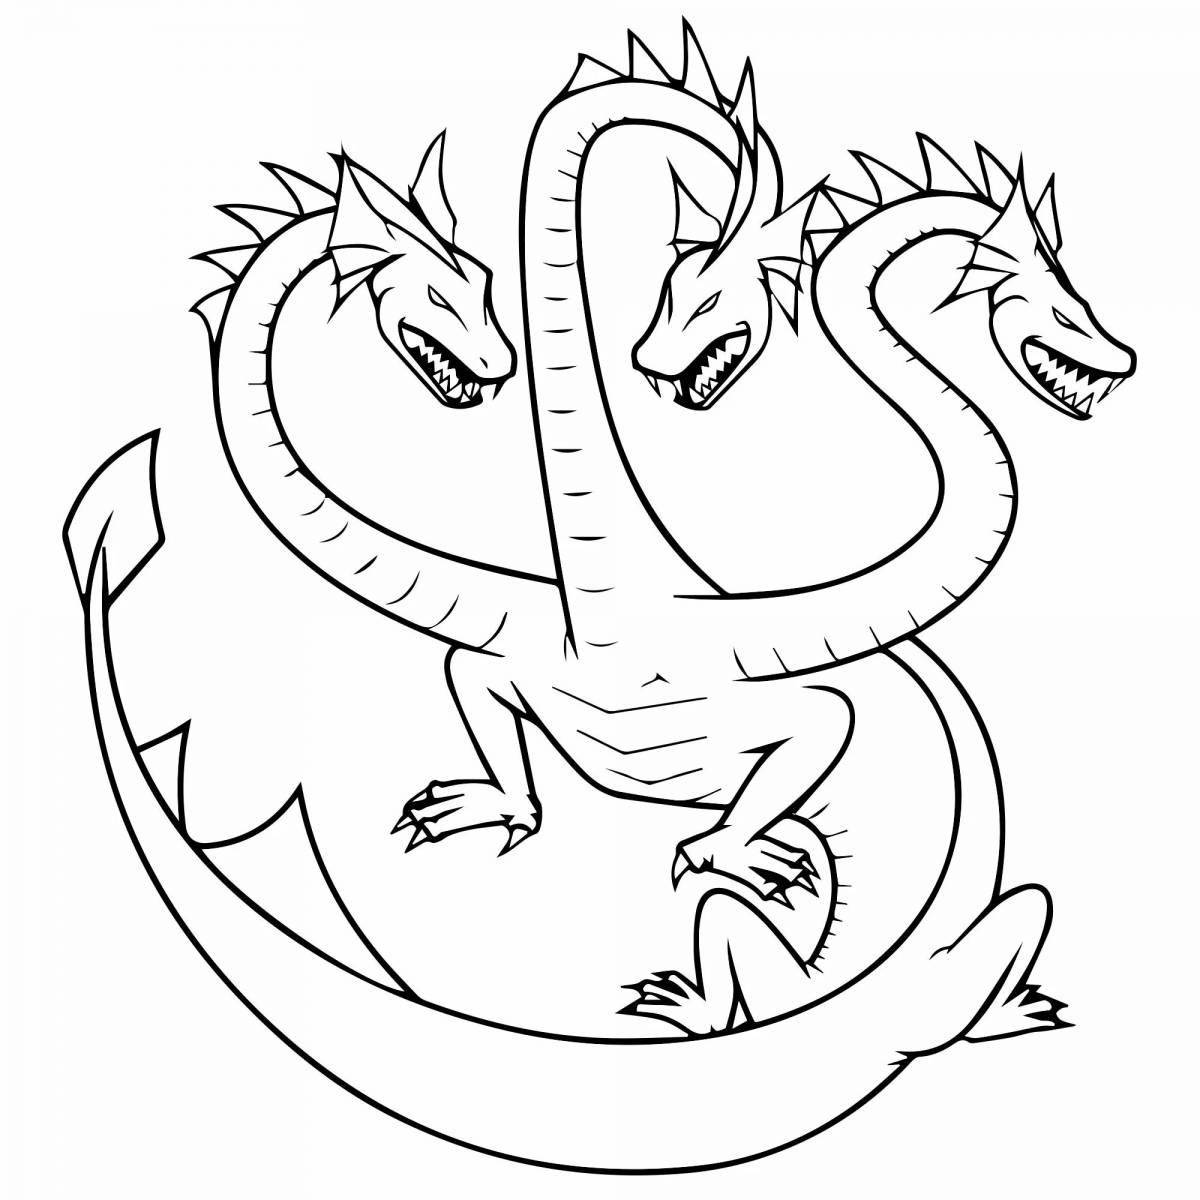 Adorable six-headed snake coloring page